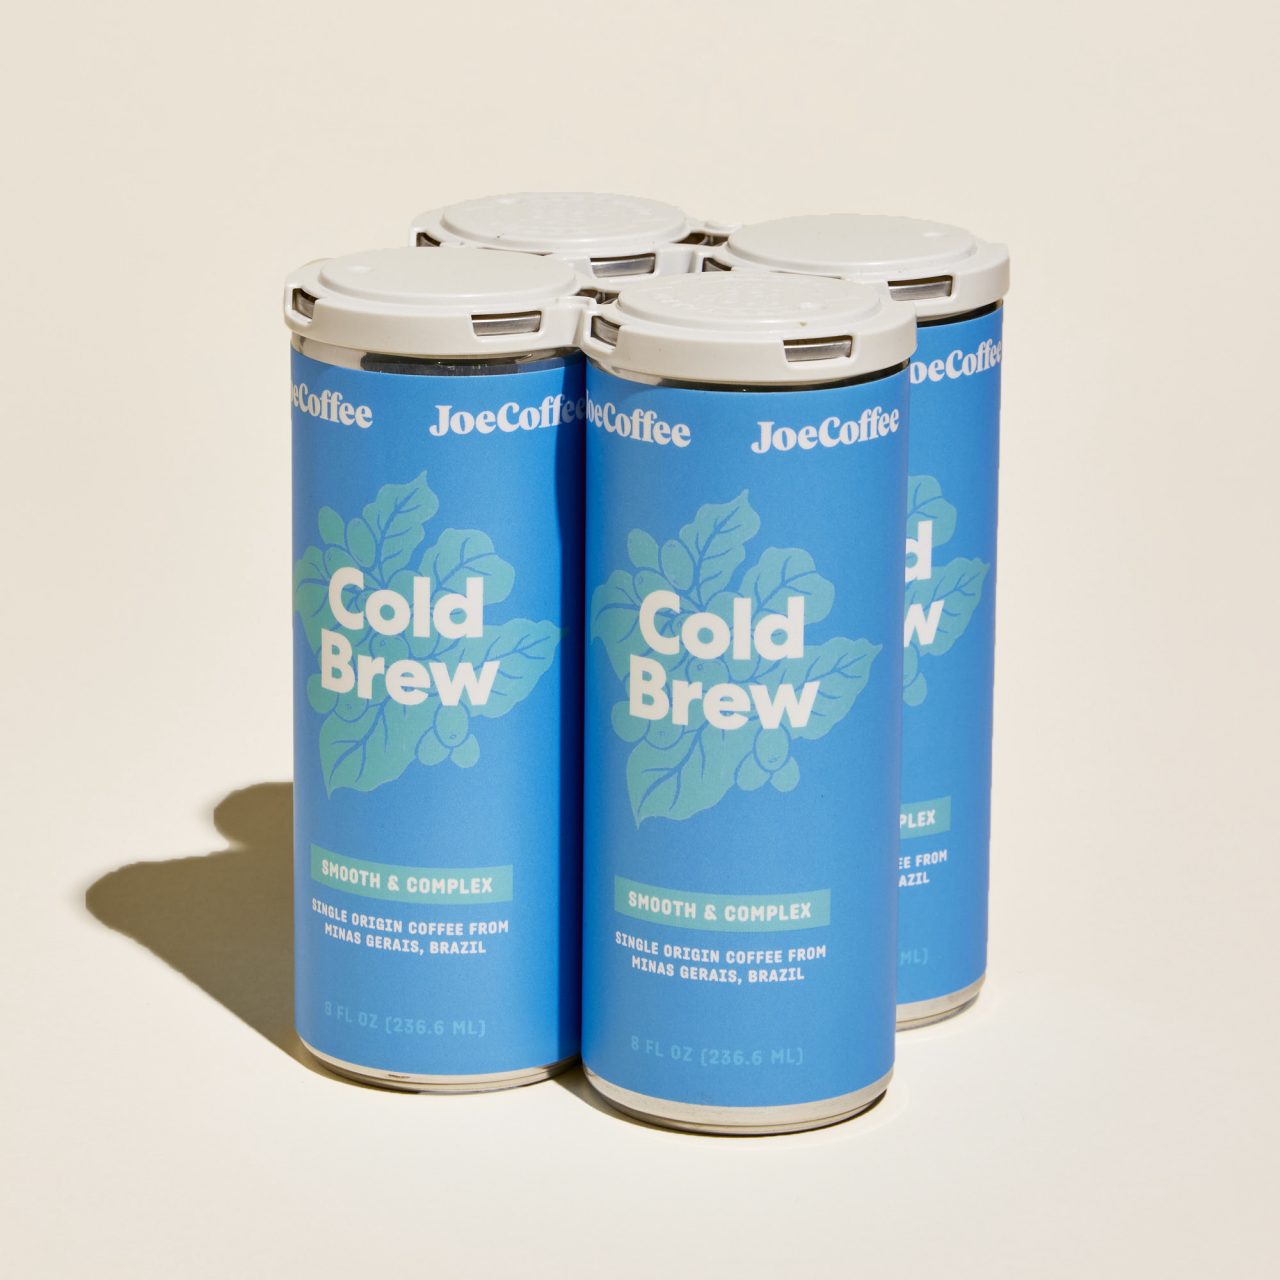 4-pack of Joe Coffee Cold Brew cans